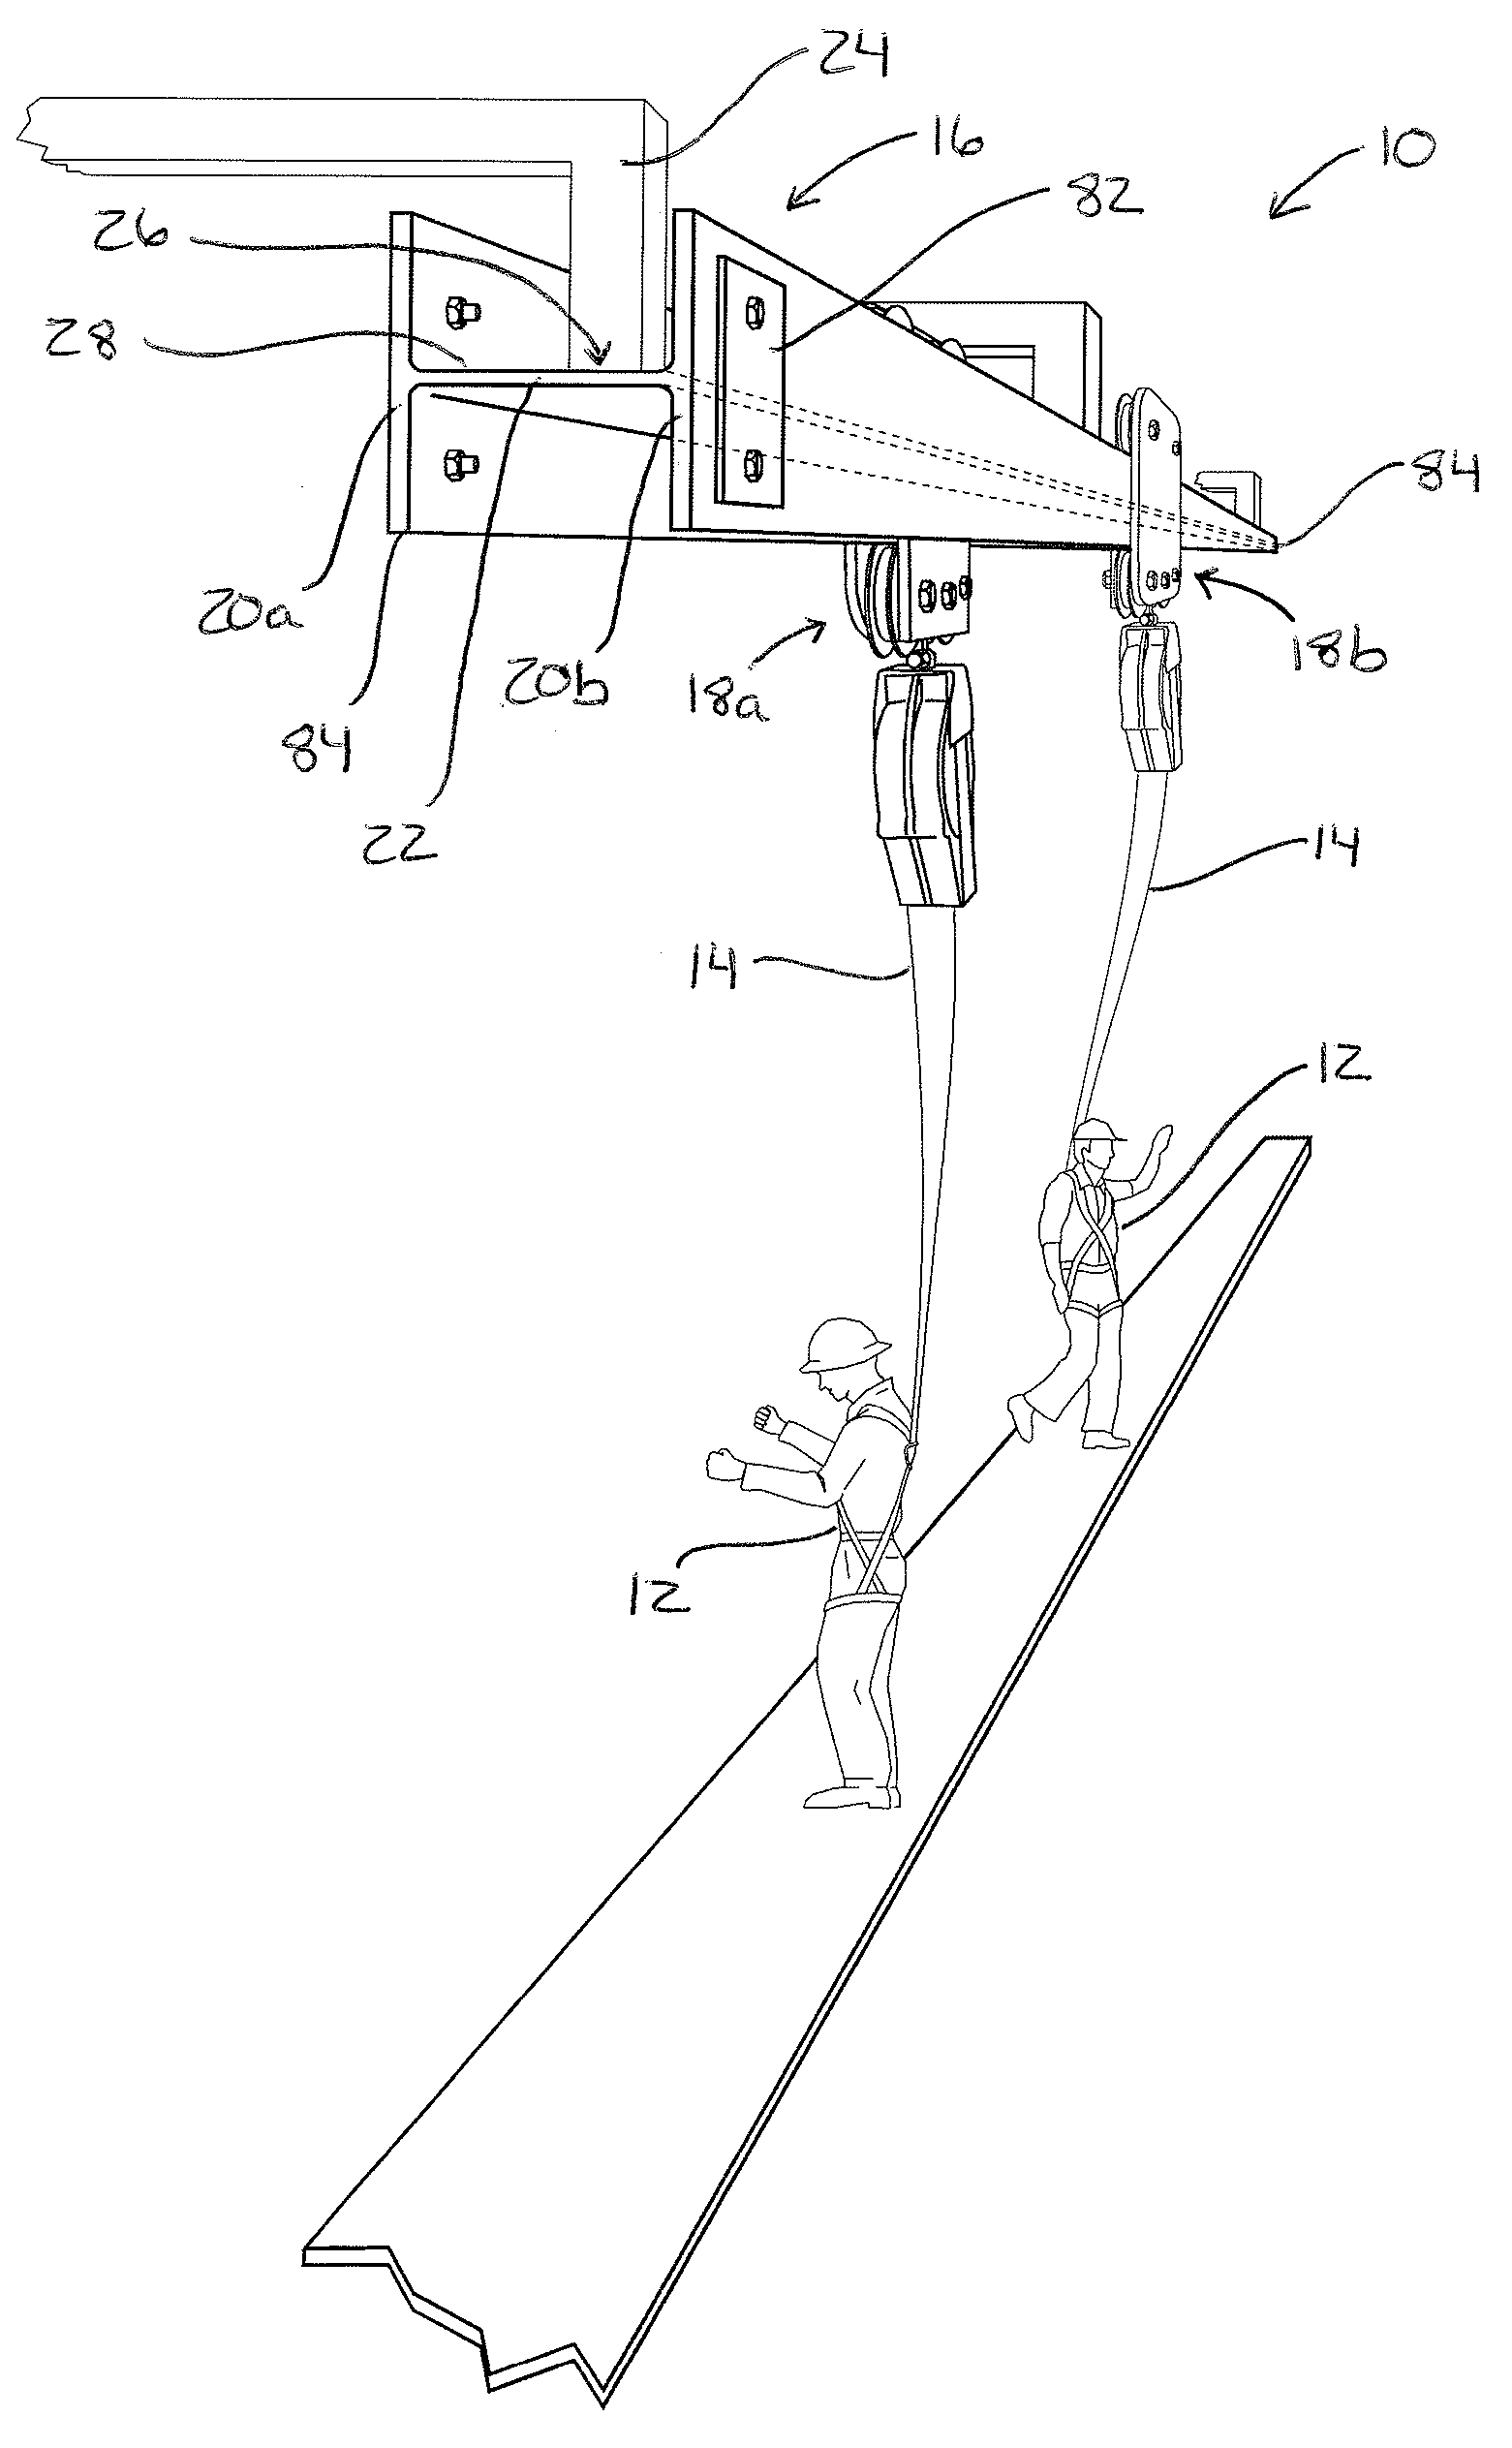 Rigid rail fall protection apparatus having bypassable moveable anchorages